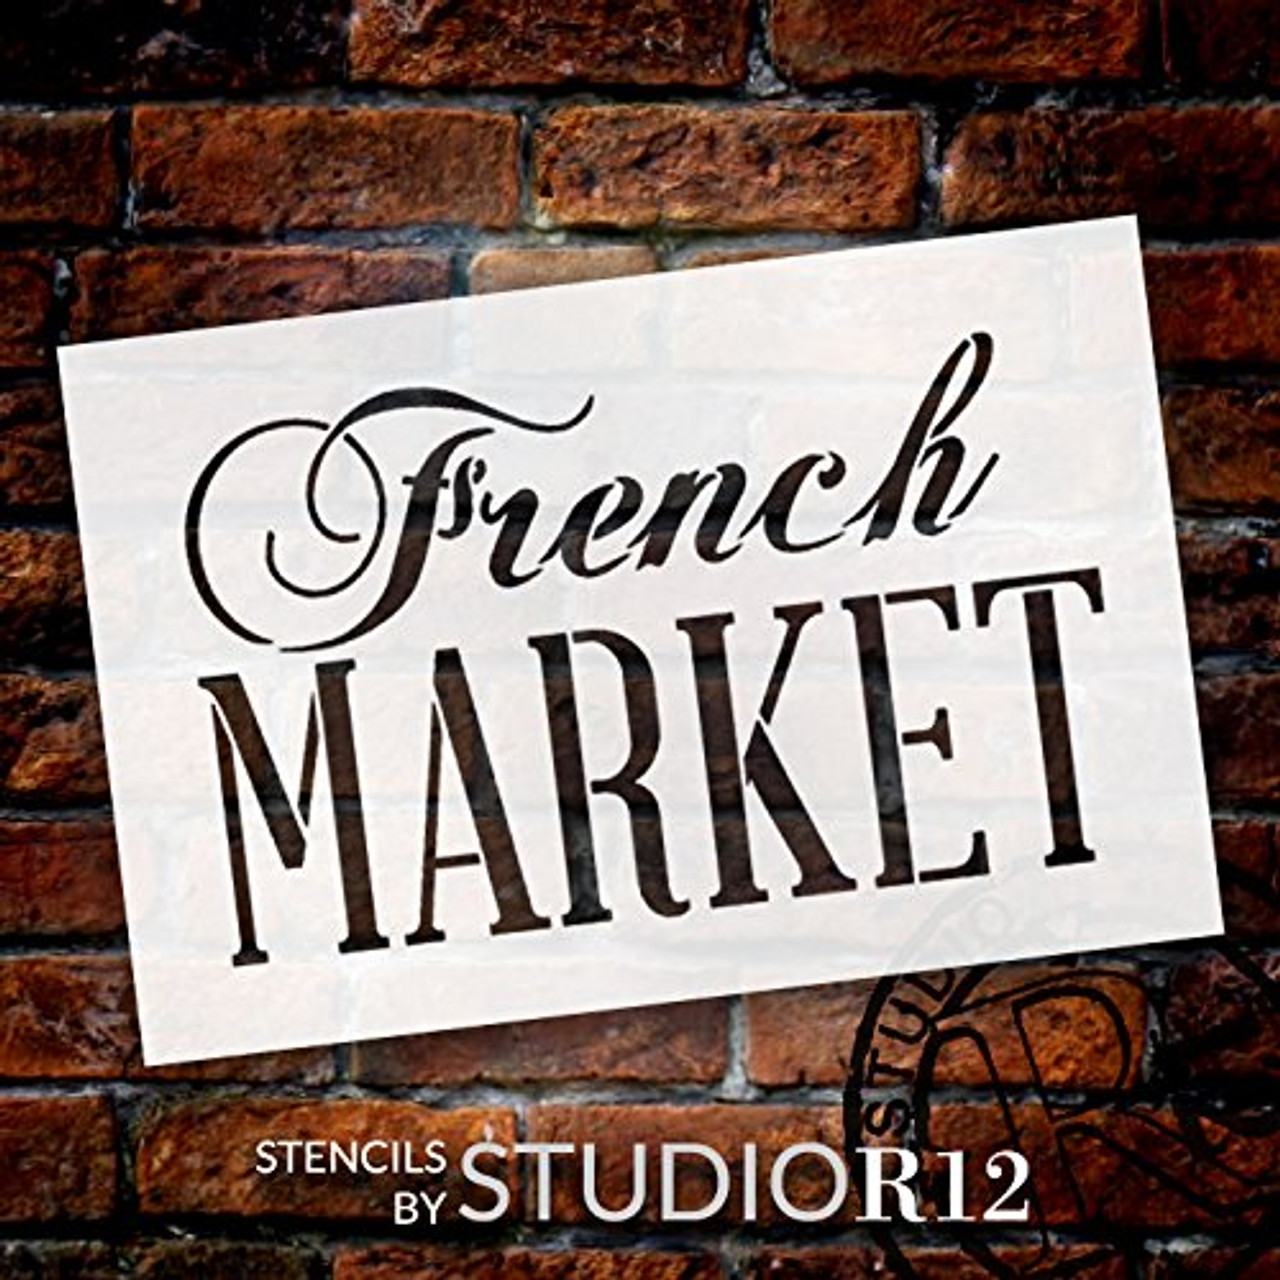 French Market Word Stencil by StudioR12  | Painting, Chalk | Use for Wood Signs, Painted Furniture, Home Decor - 24" x 16" - STCL909_7